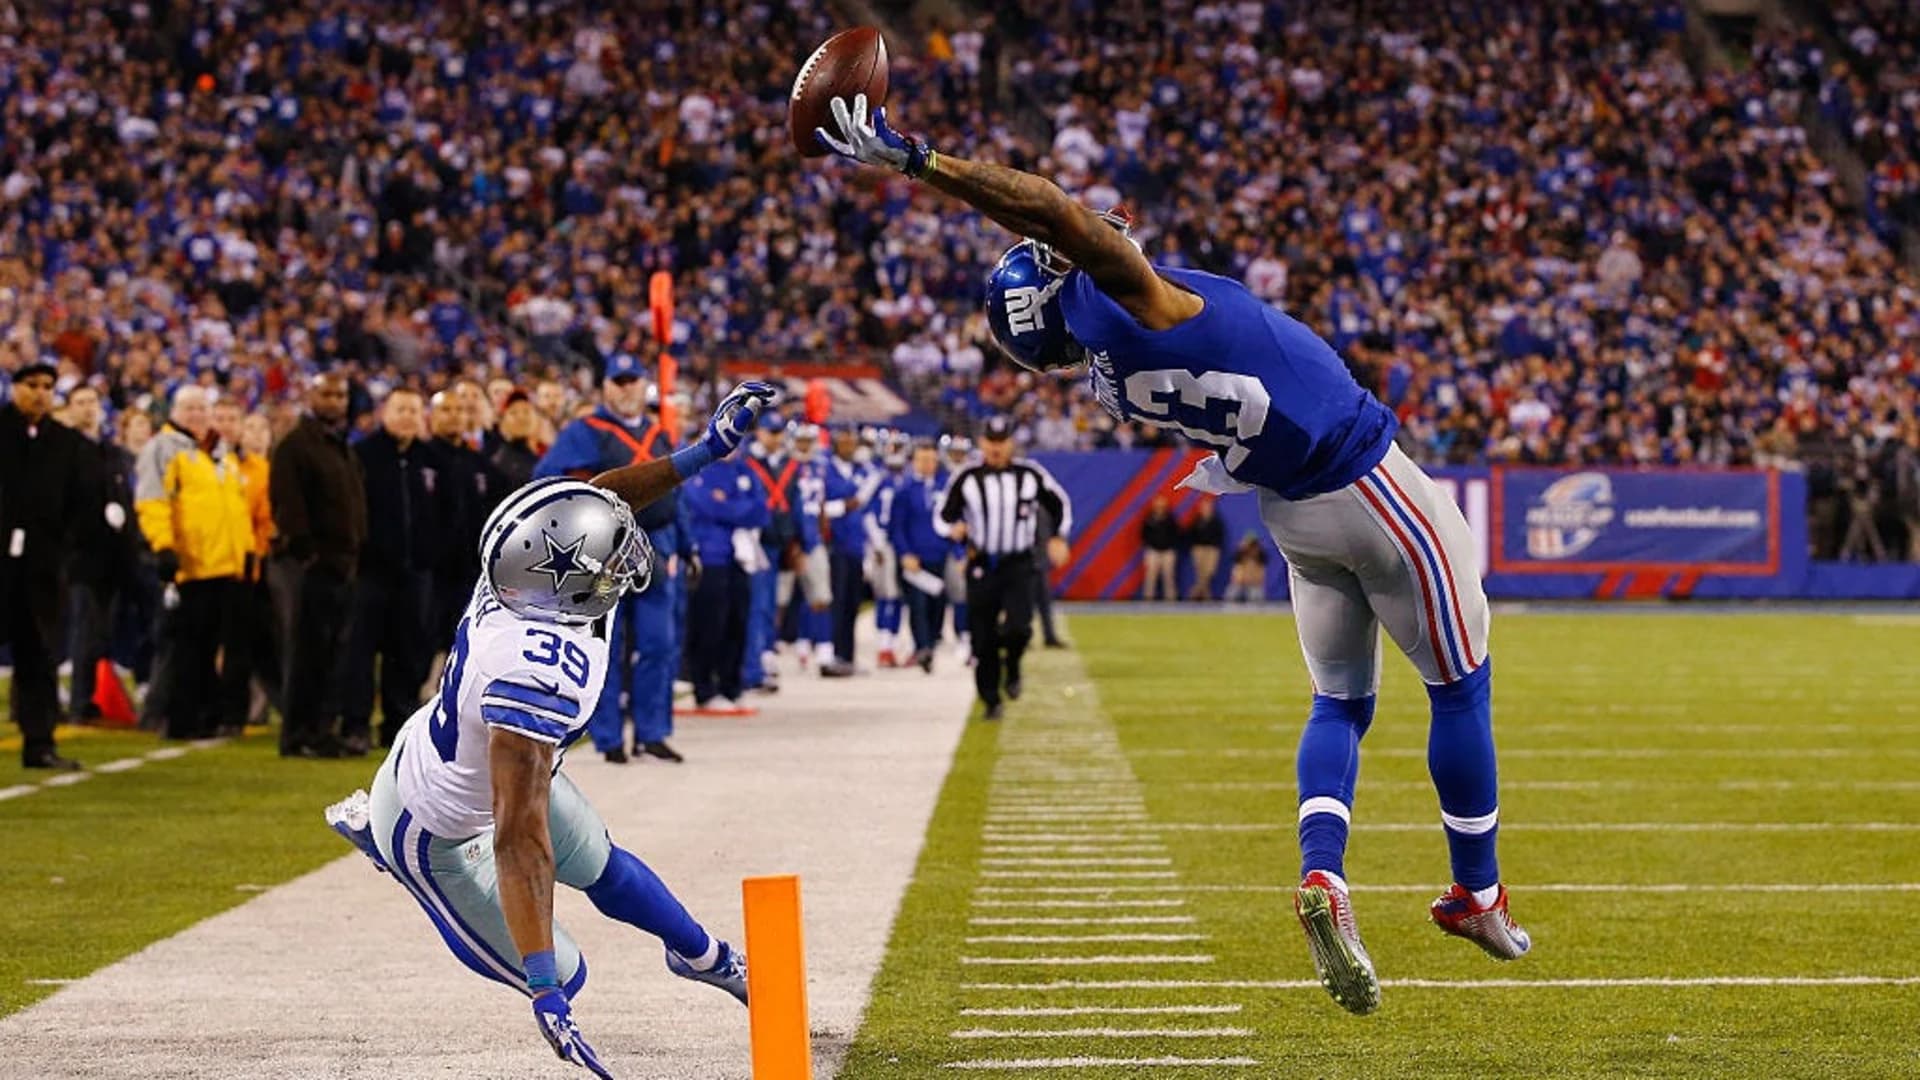 AP Sources: Browns to acquire star receiver Beckham from NY